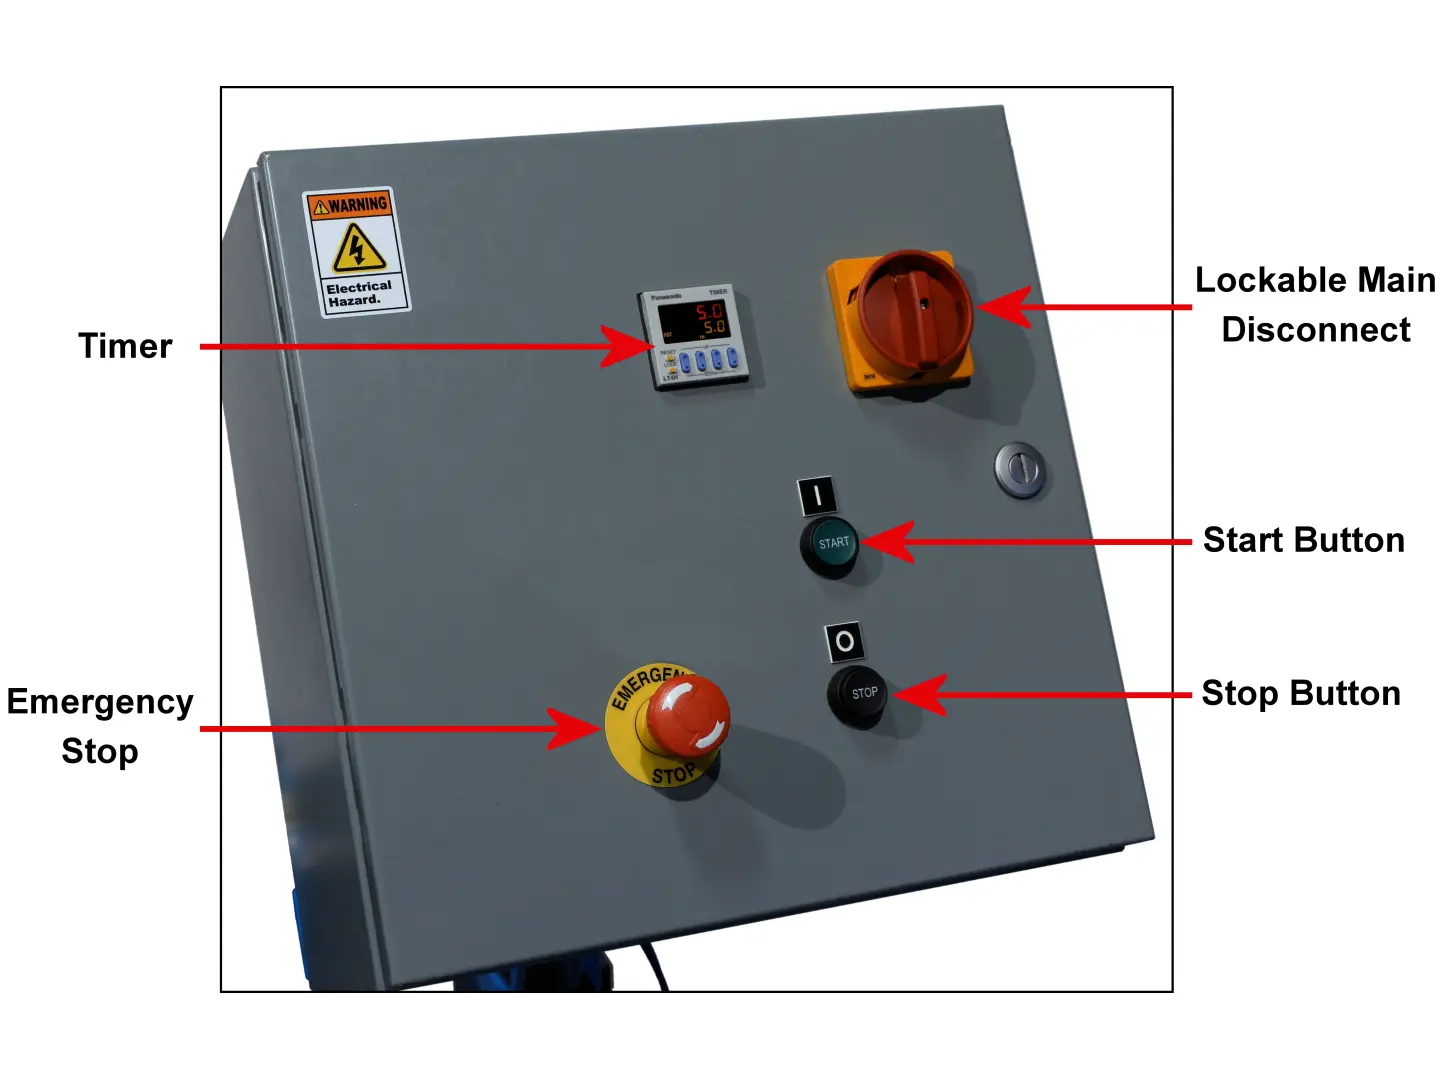 Control Box with Labels